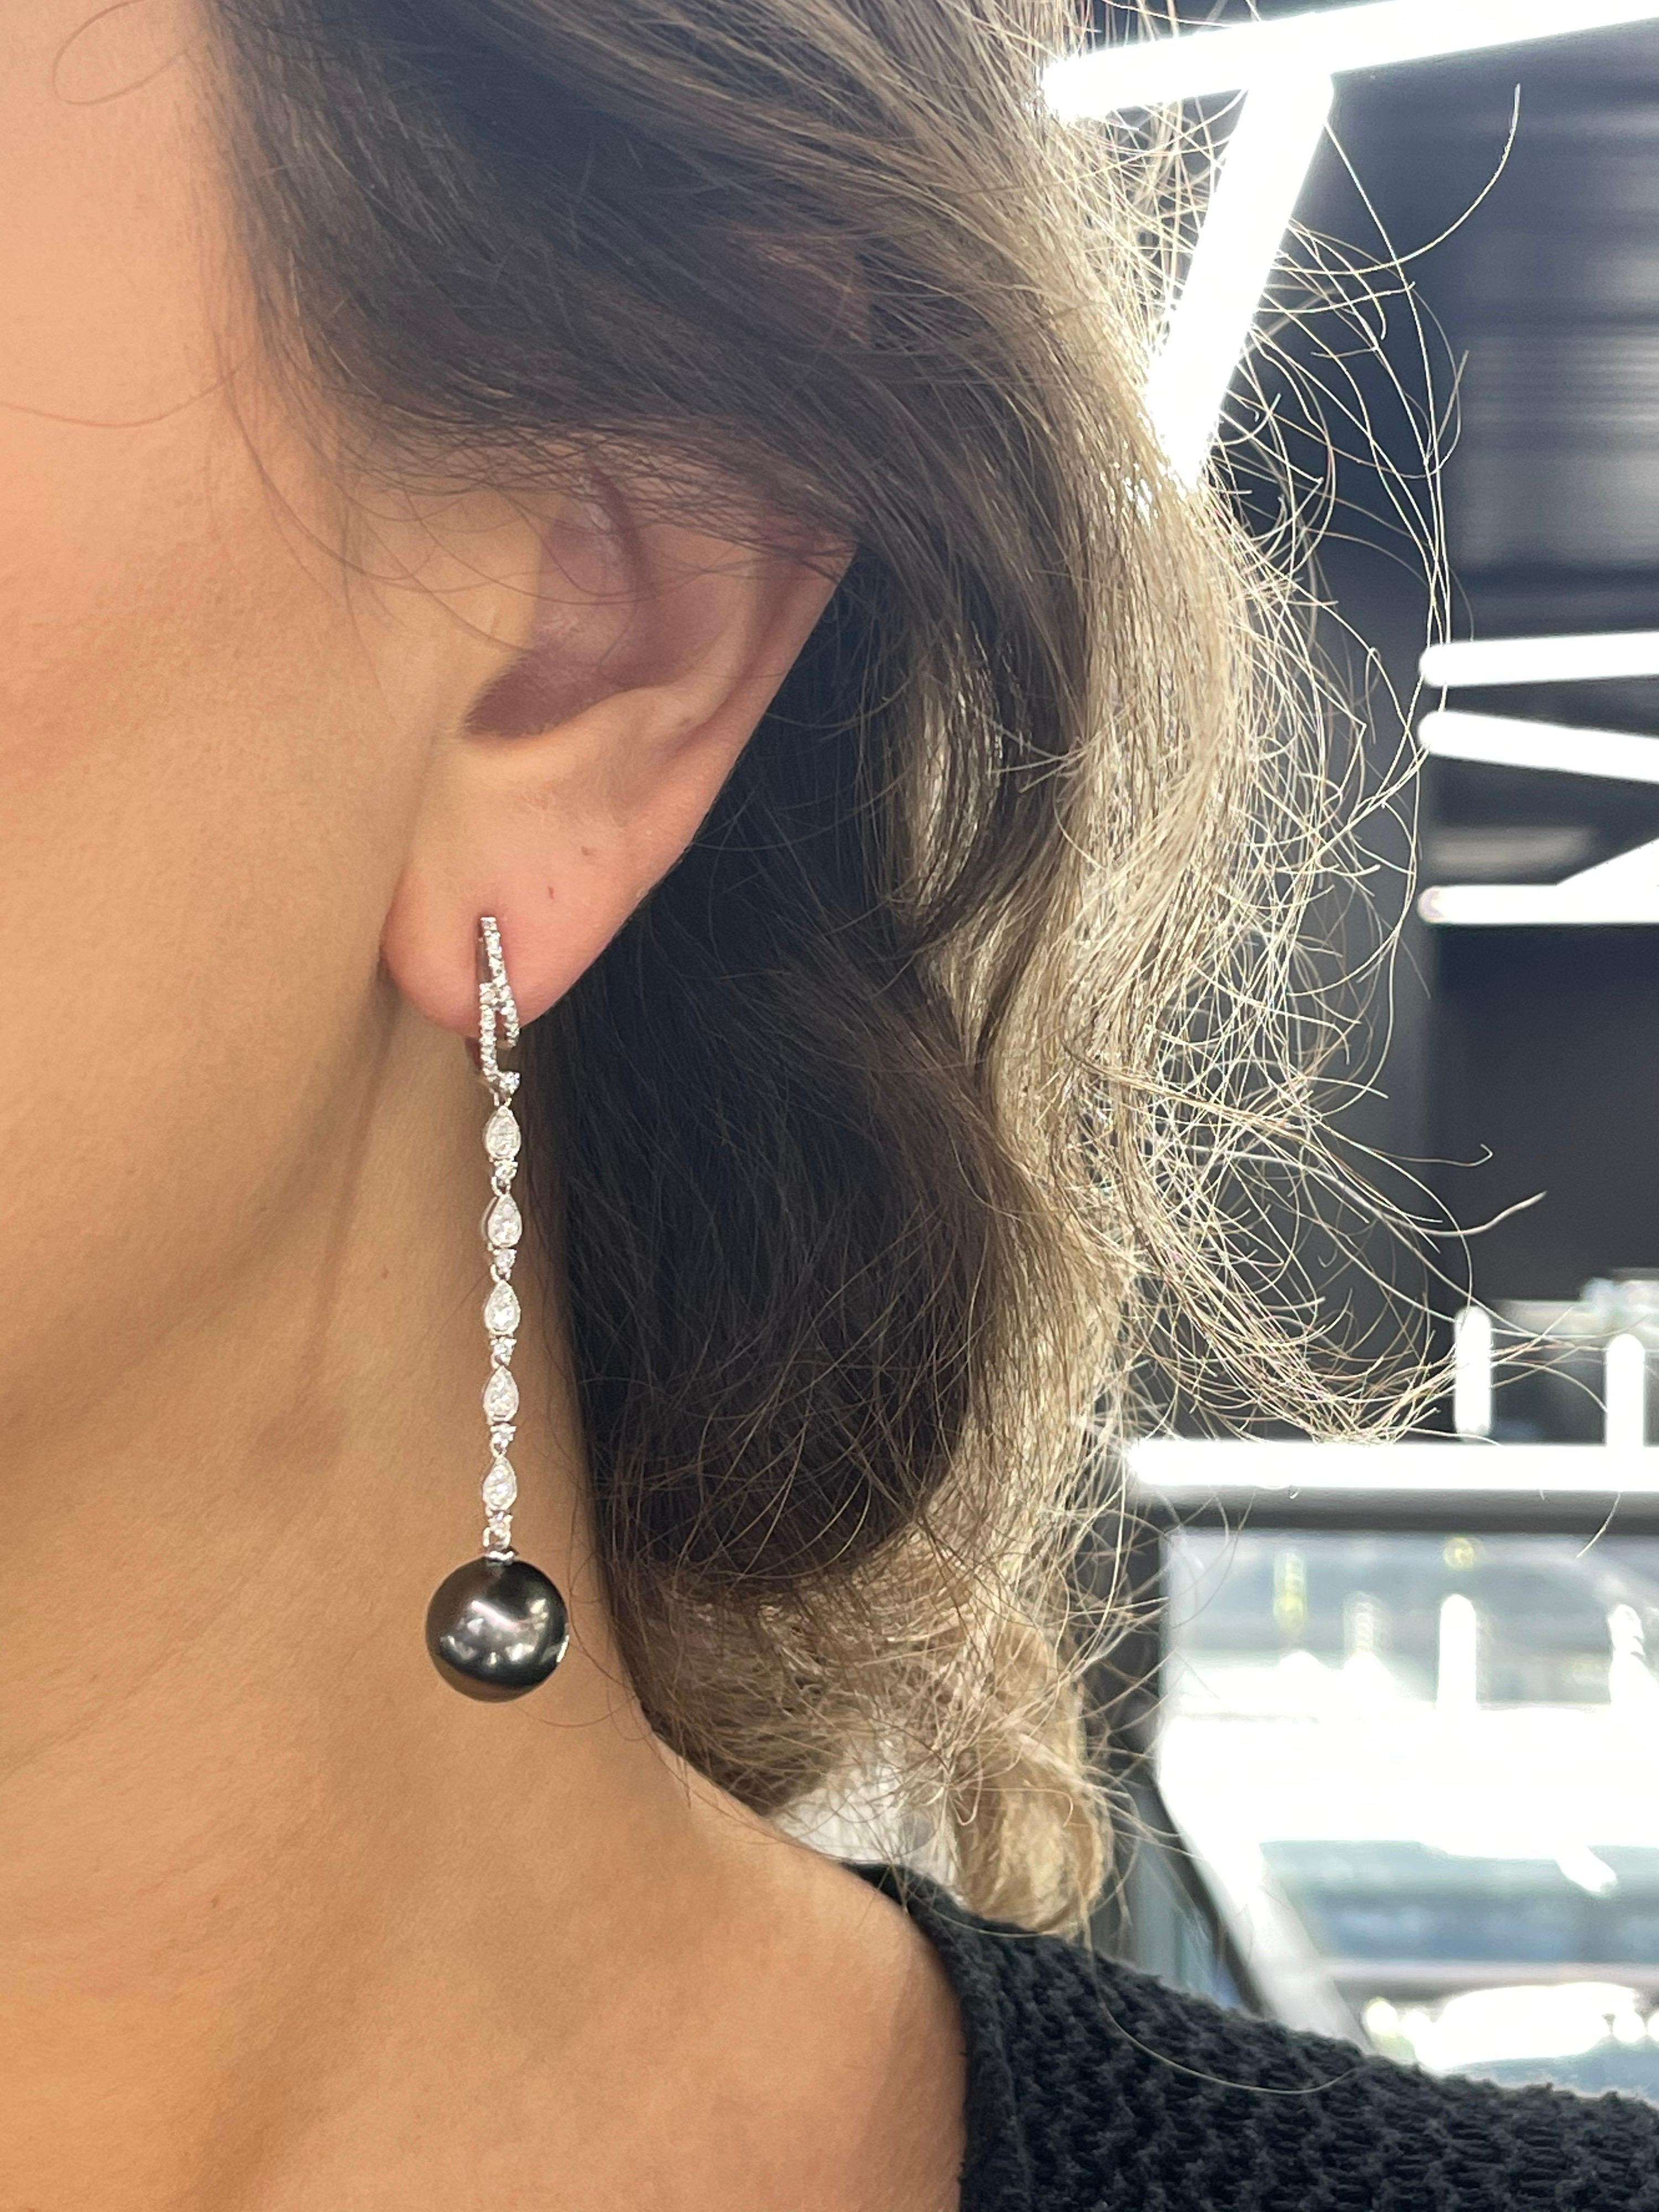 18 Karat white gold drop earrings featuring round brilliants weighing 0.58 carats and two Tahitian Pearls measuring 11-12 mm.
Color G-H
Clarity SI
Also Available in Yellow Gold. 